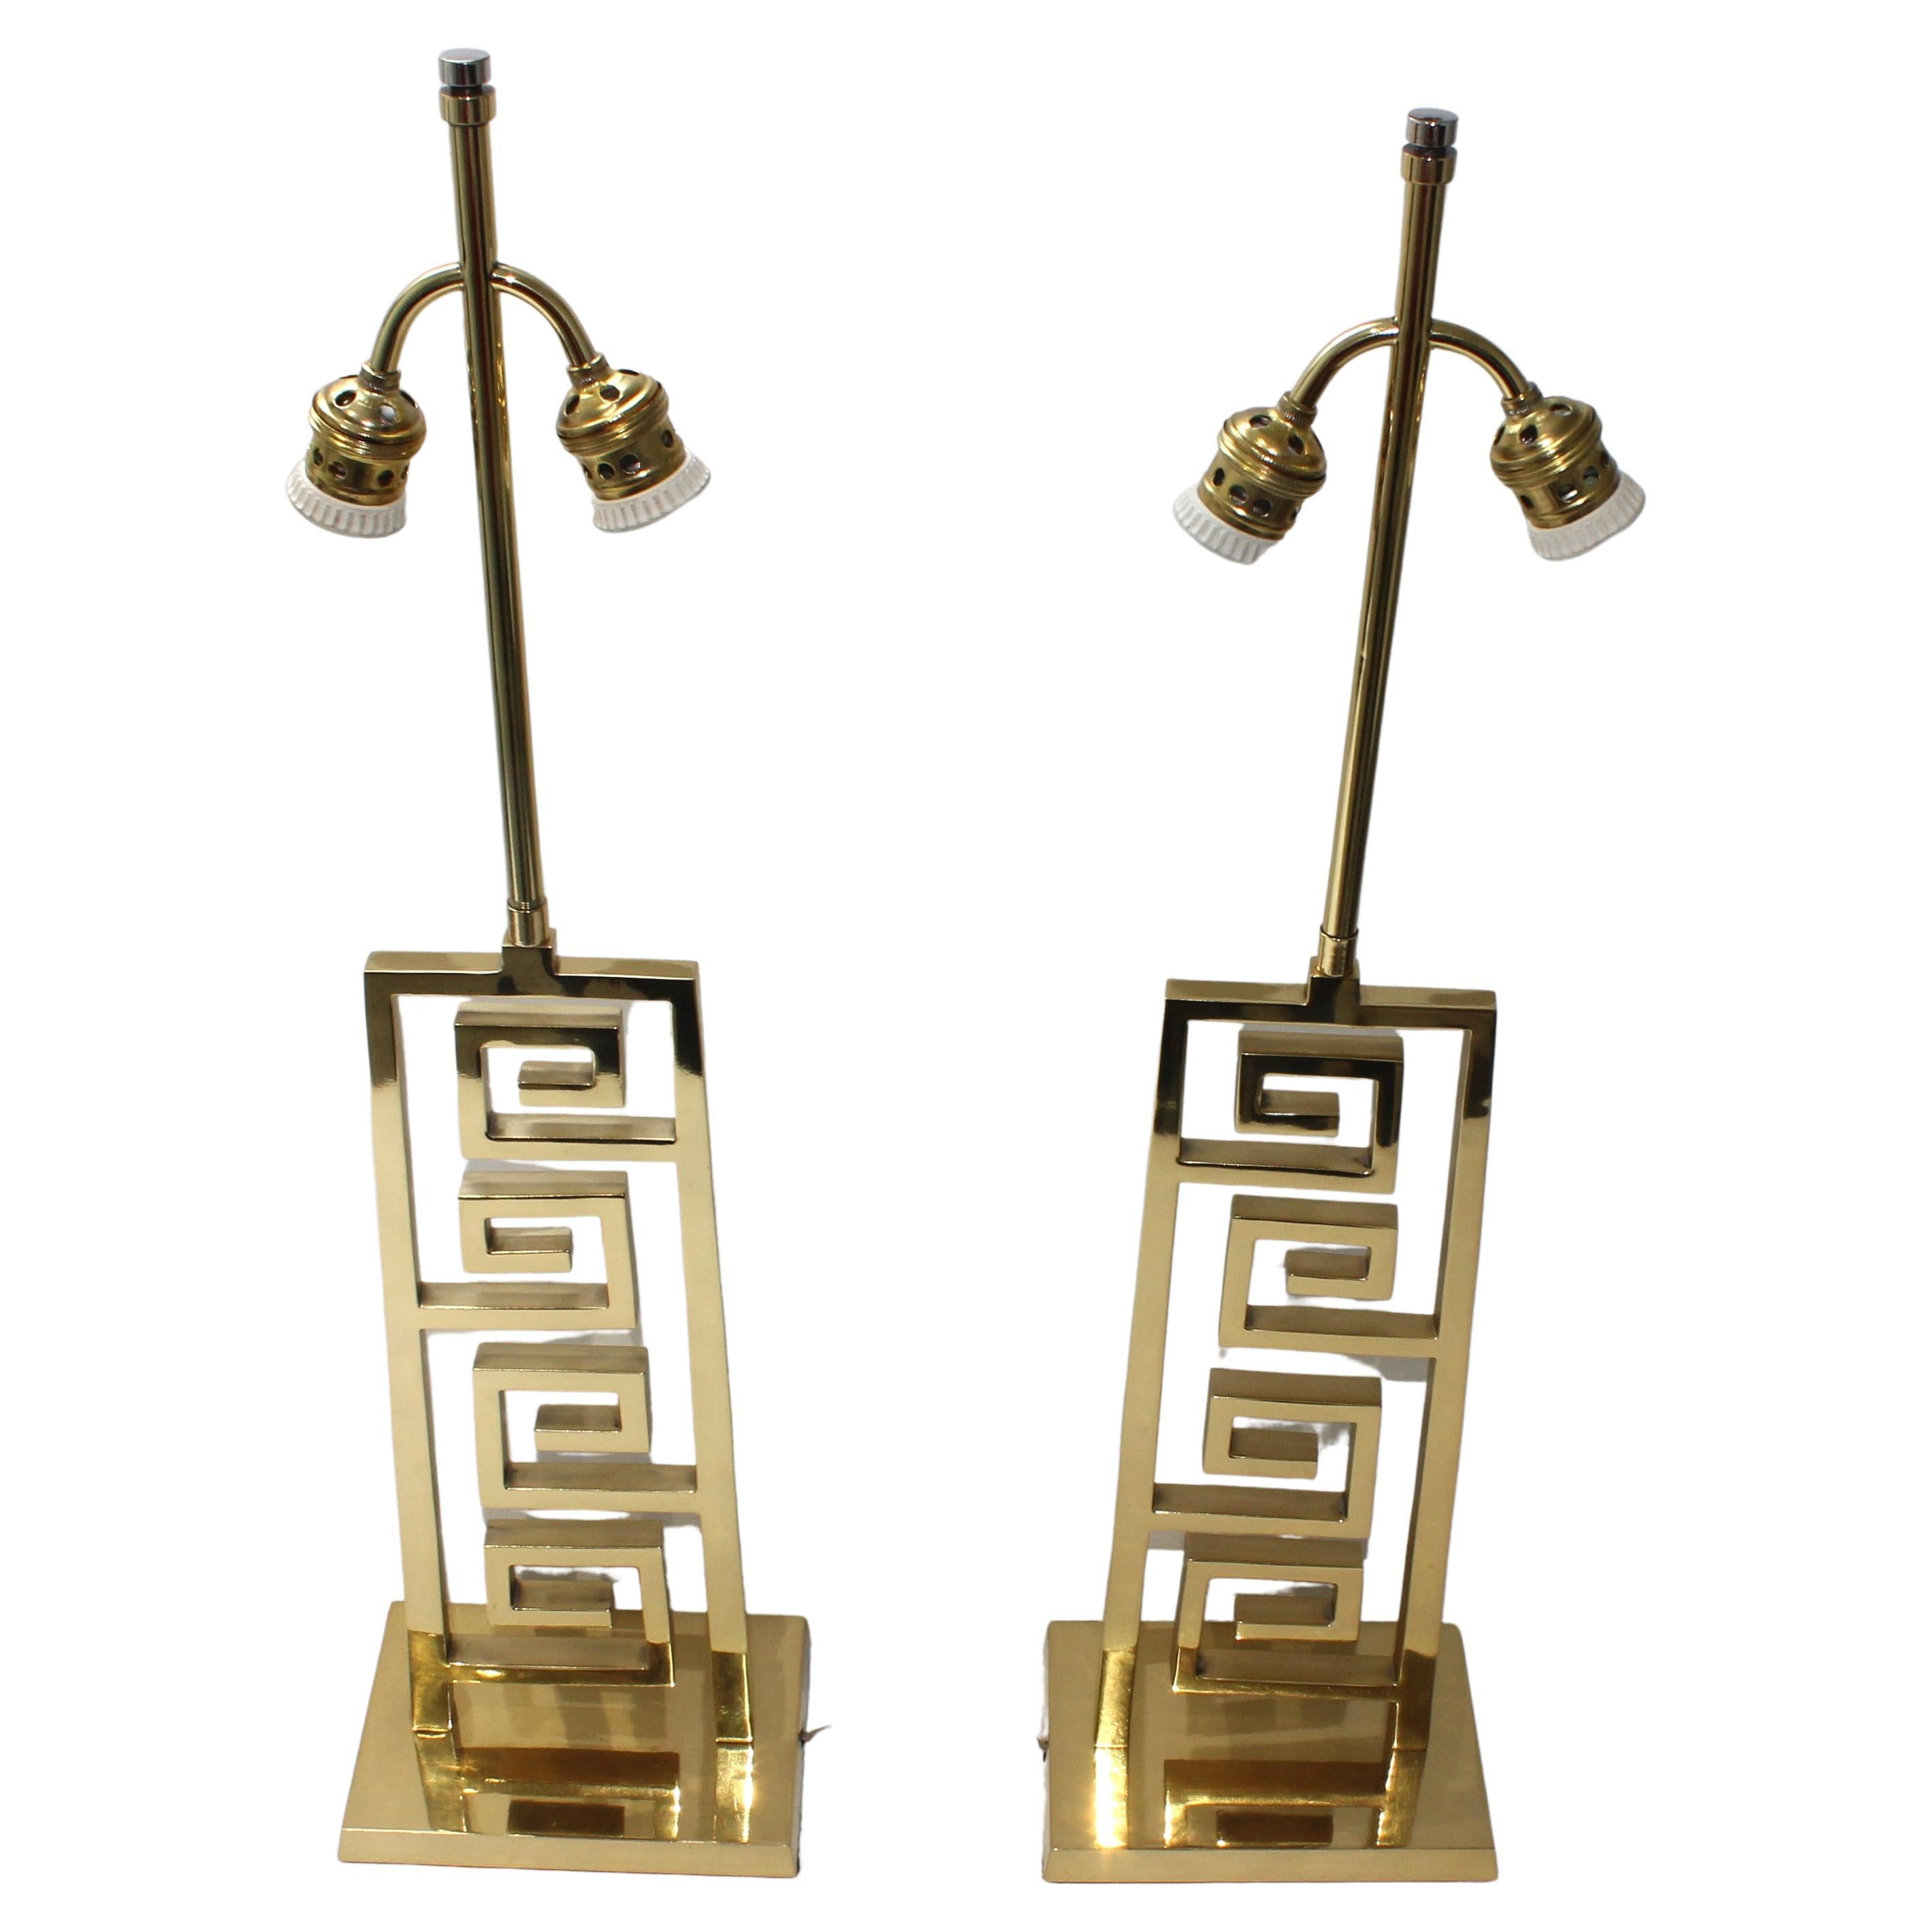 This stylish and chic pair of Art Deco table lamps date to the 1920s-1930s and are handcrafted in cast bronze.

Note: Requires two Edison based light bulbs each.

Note: The lights are controled with a line switch. 

Note: Lamp shades are not